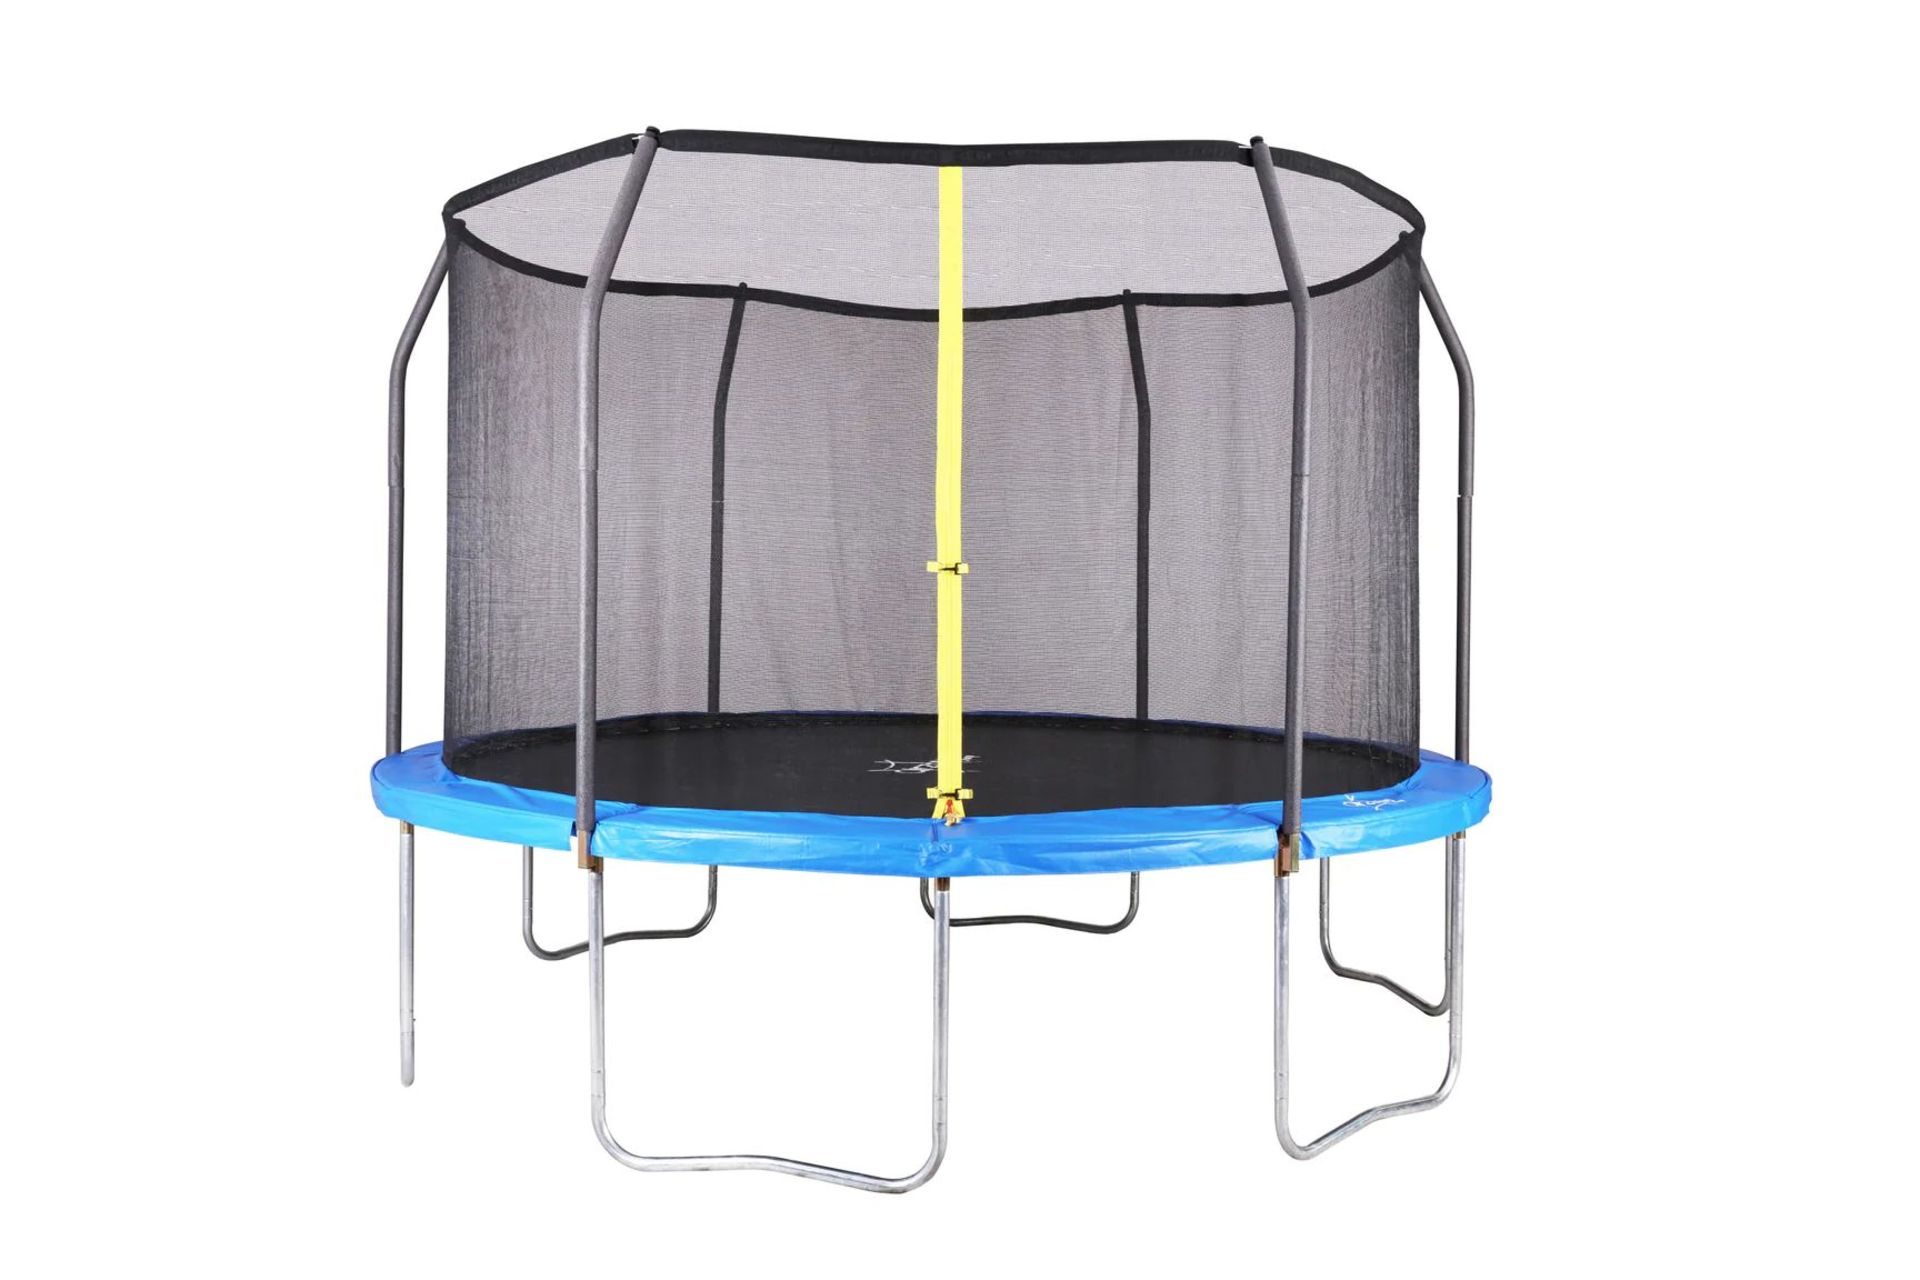 Pallet To Contain 6 x New & Boxed Airzone 12 Foot Trampoline with Enclosure. The AirZone Jump 12